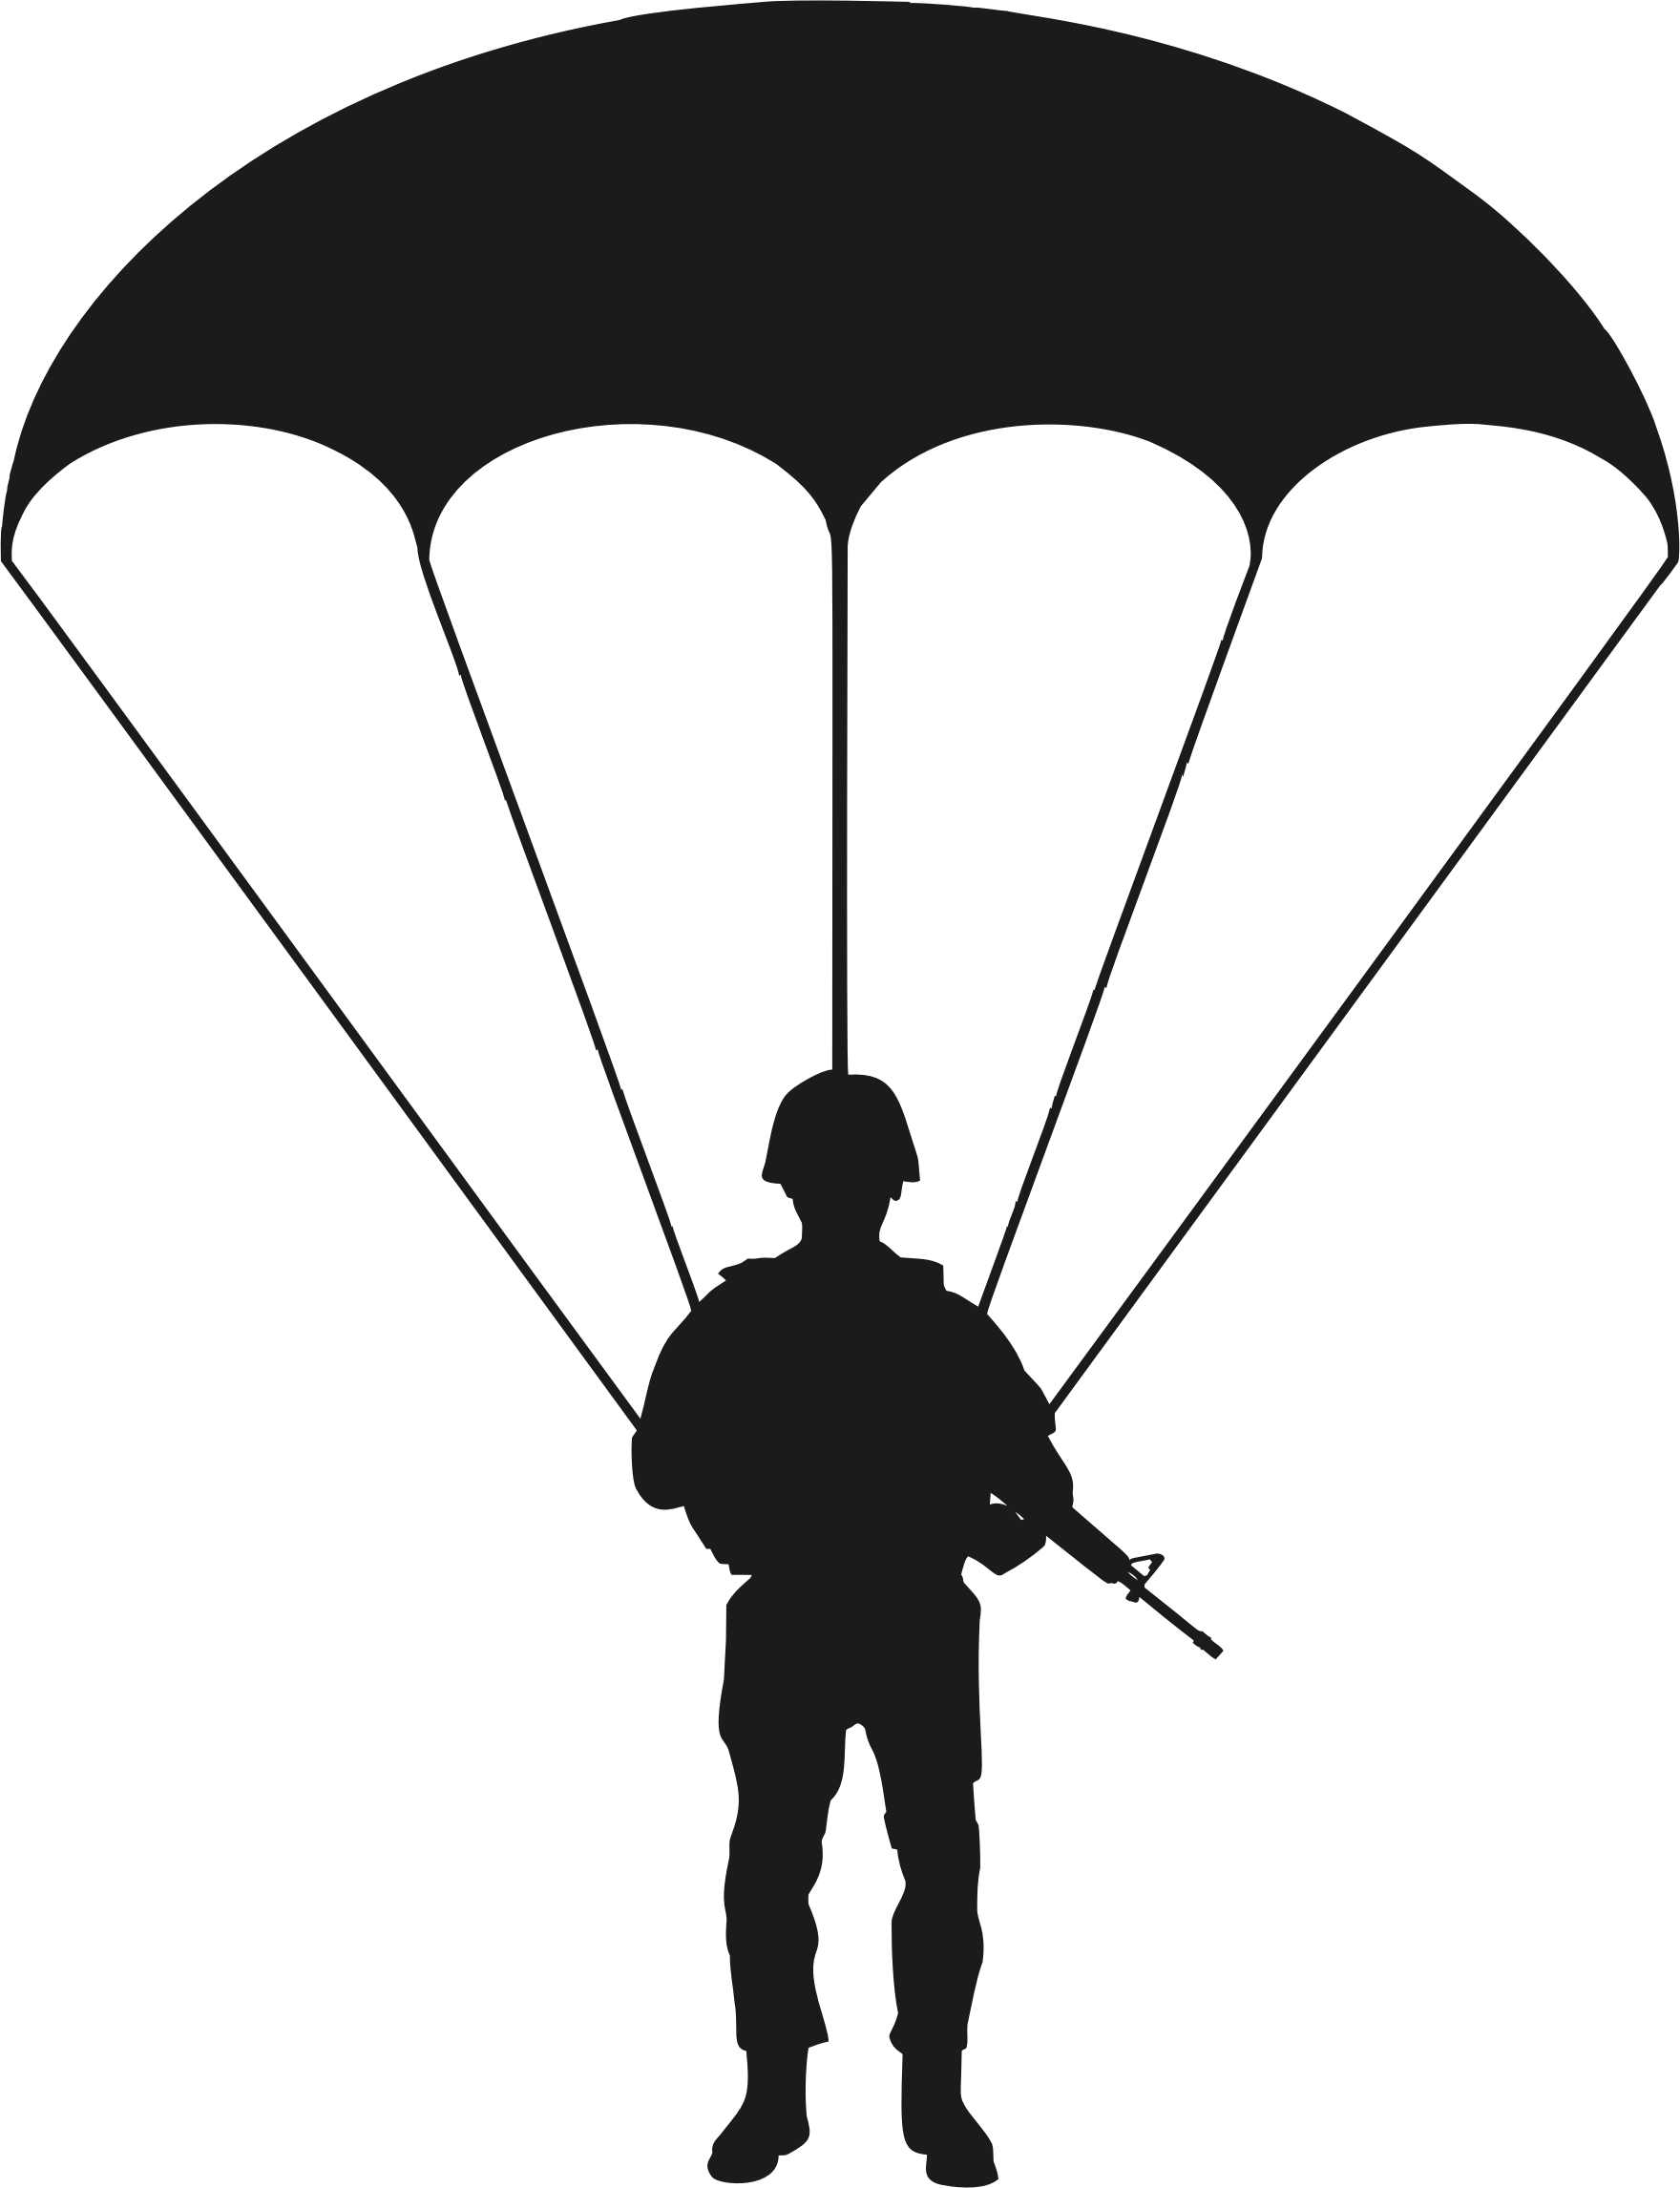 Paratrooper big image png. Fighting clipart silhouette